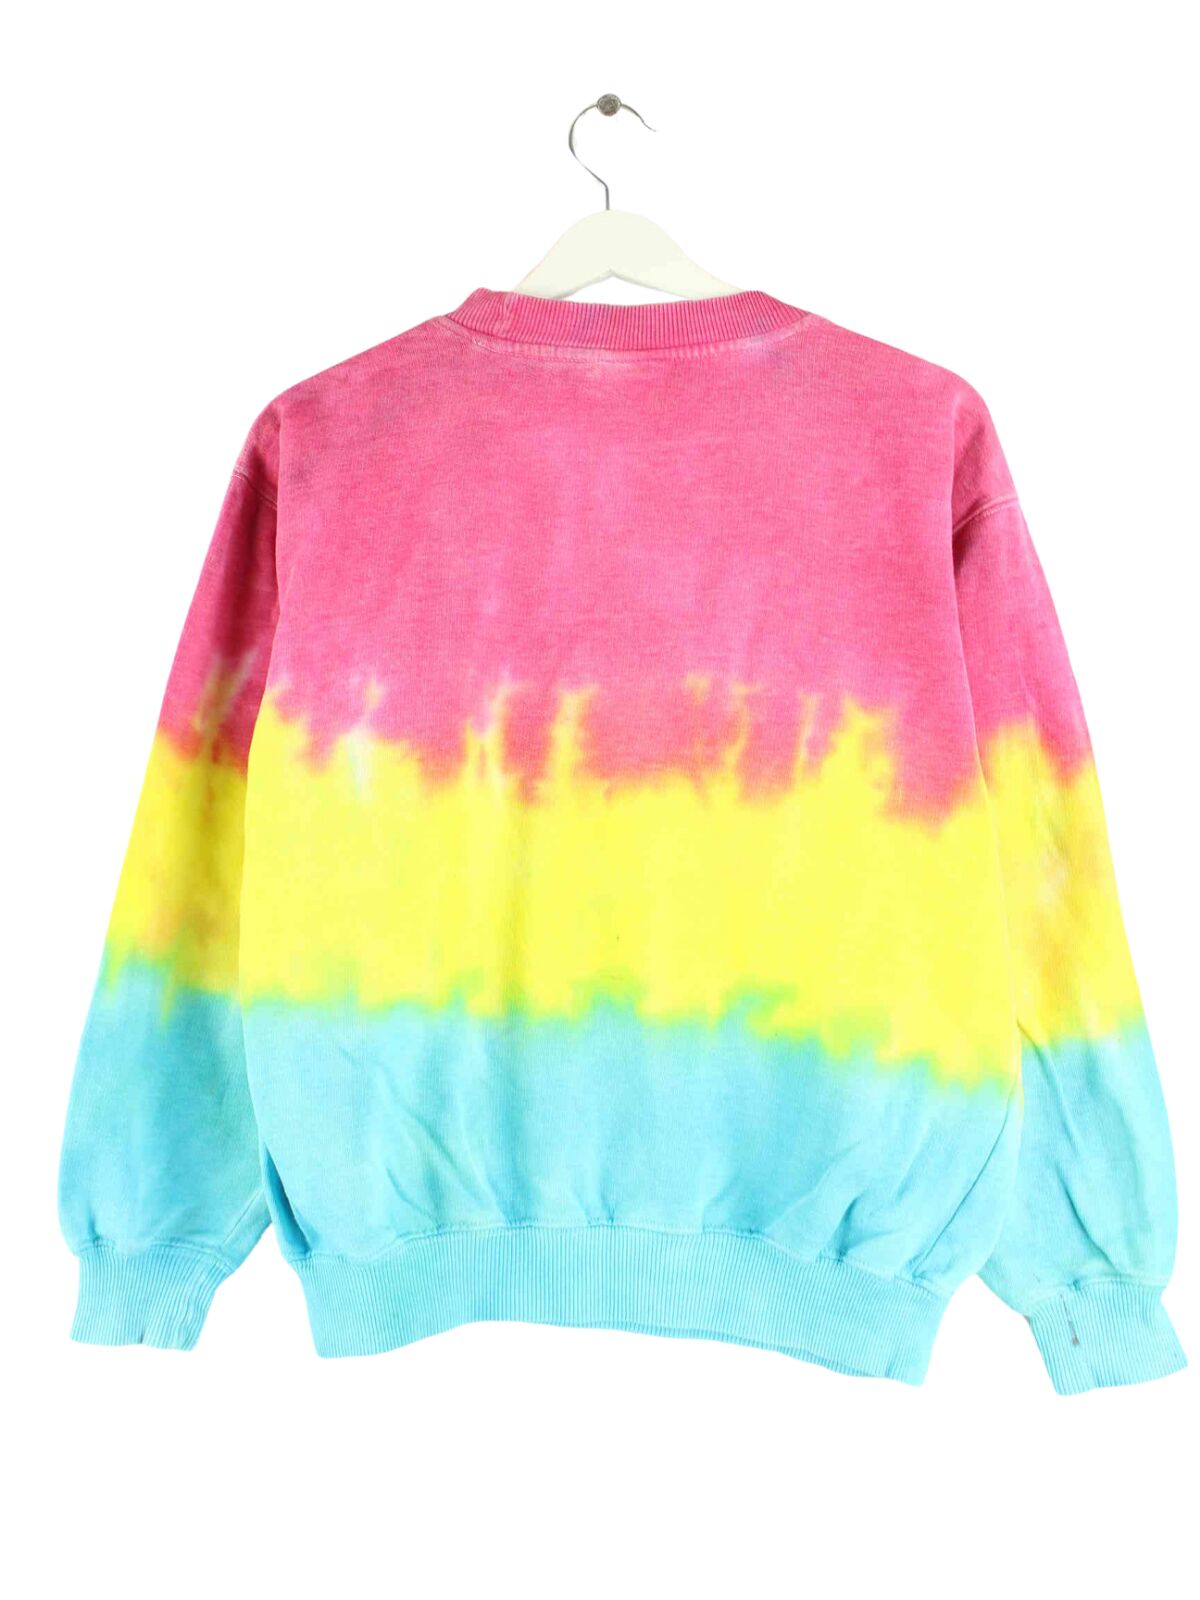 Adidas 90s Vintage Embroidered Tie Dye Sweater Mehrfarbig XS (back image)